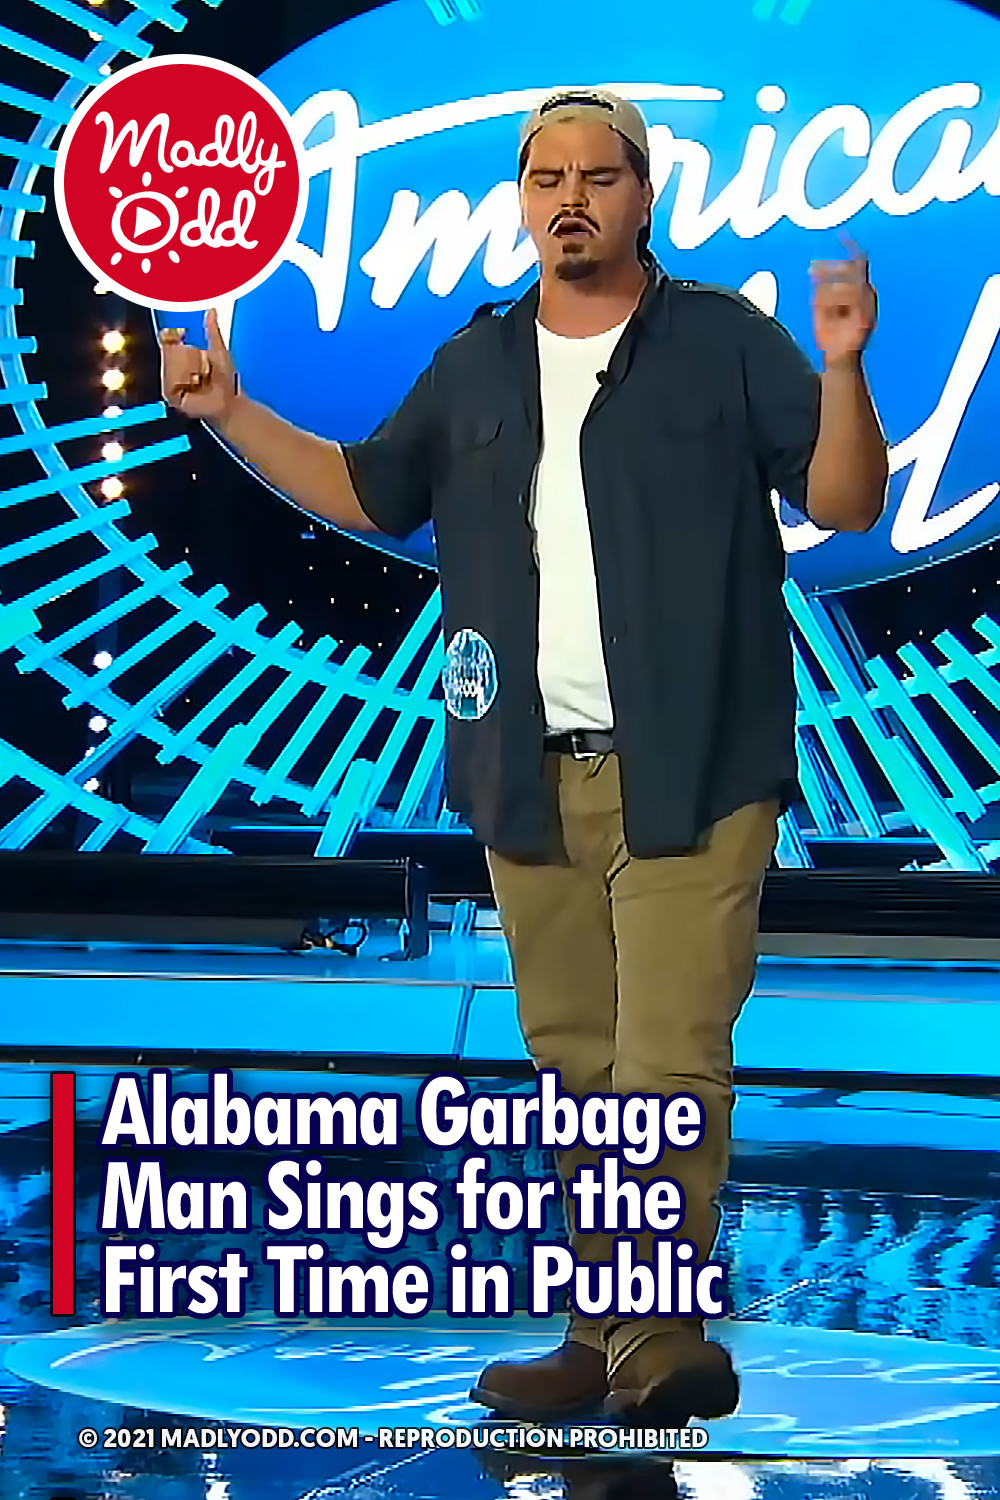 Alabama Garbage Man Sings for the First Time in Public